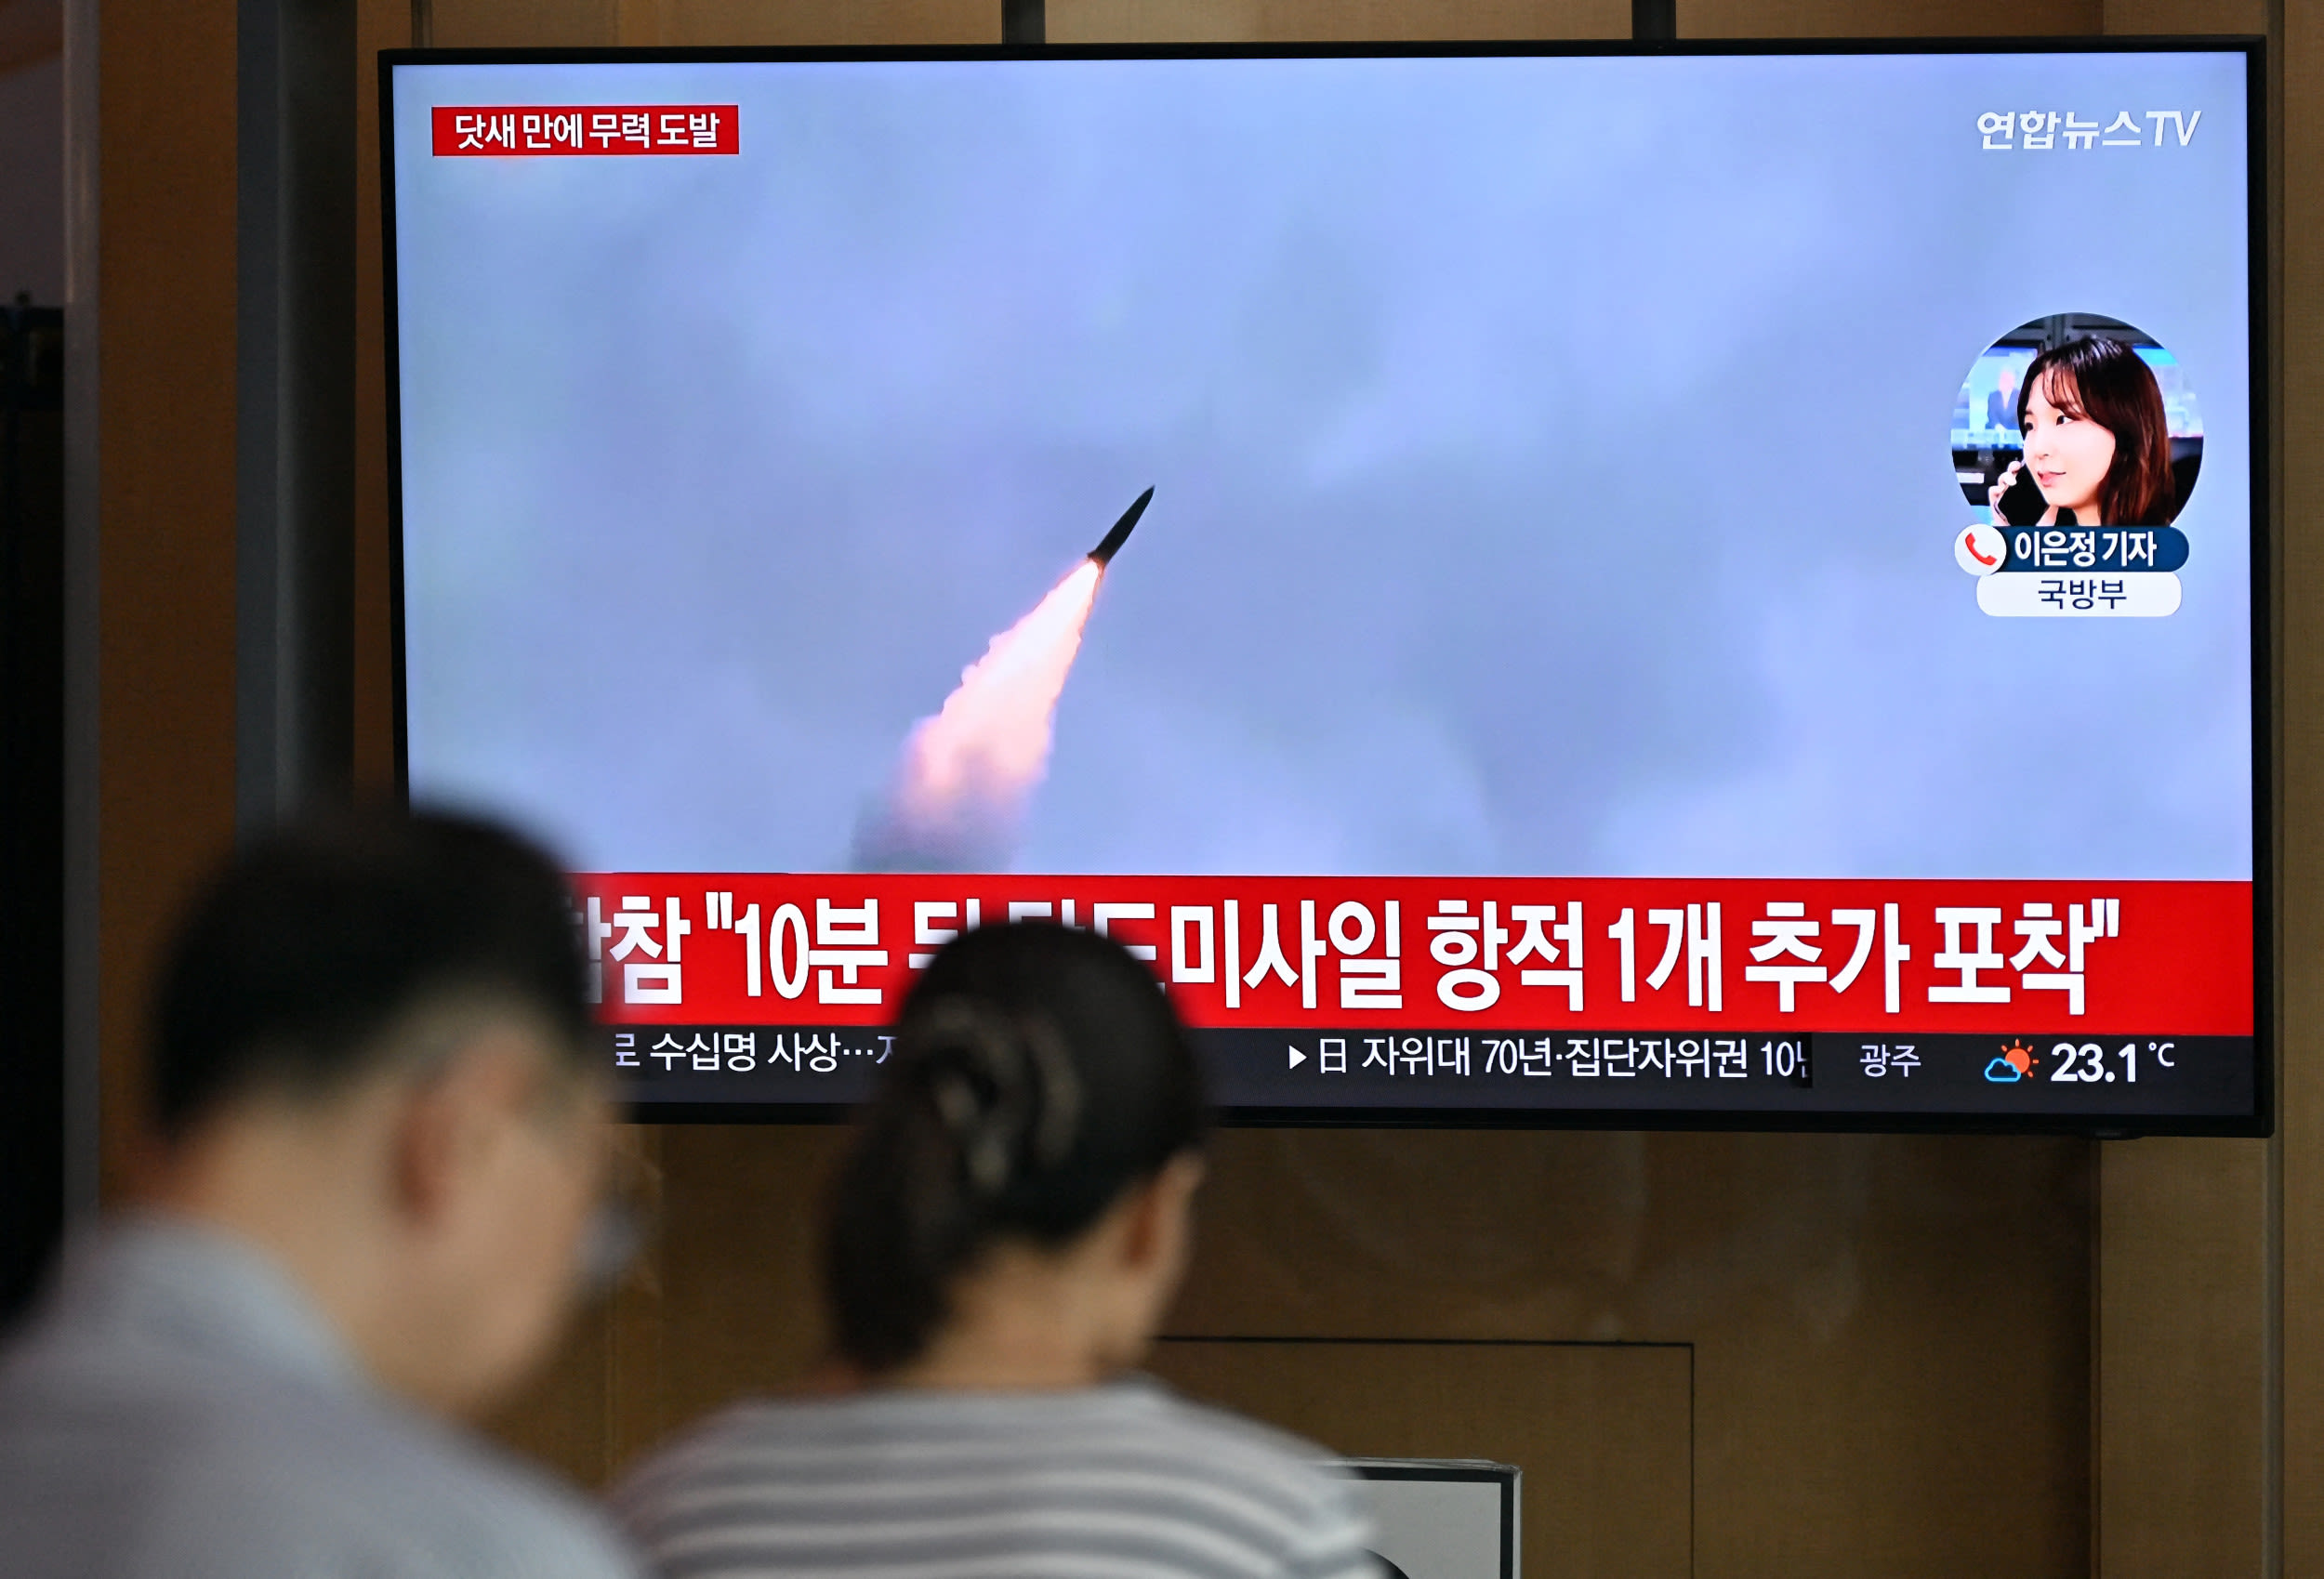 North Korea nearly hits own capital in failed missile test